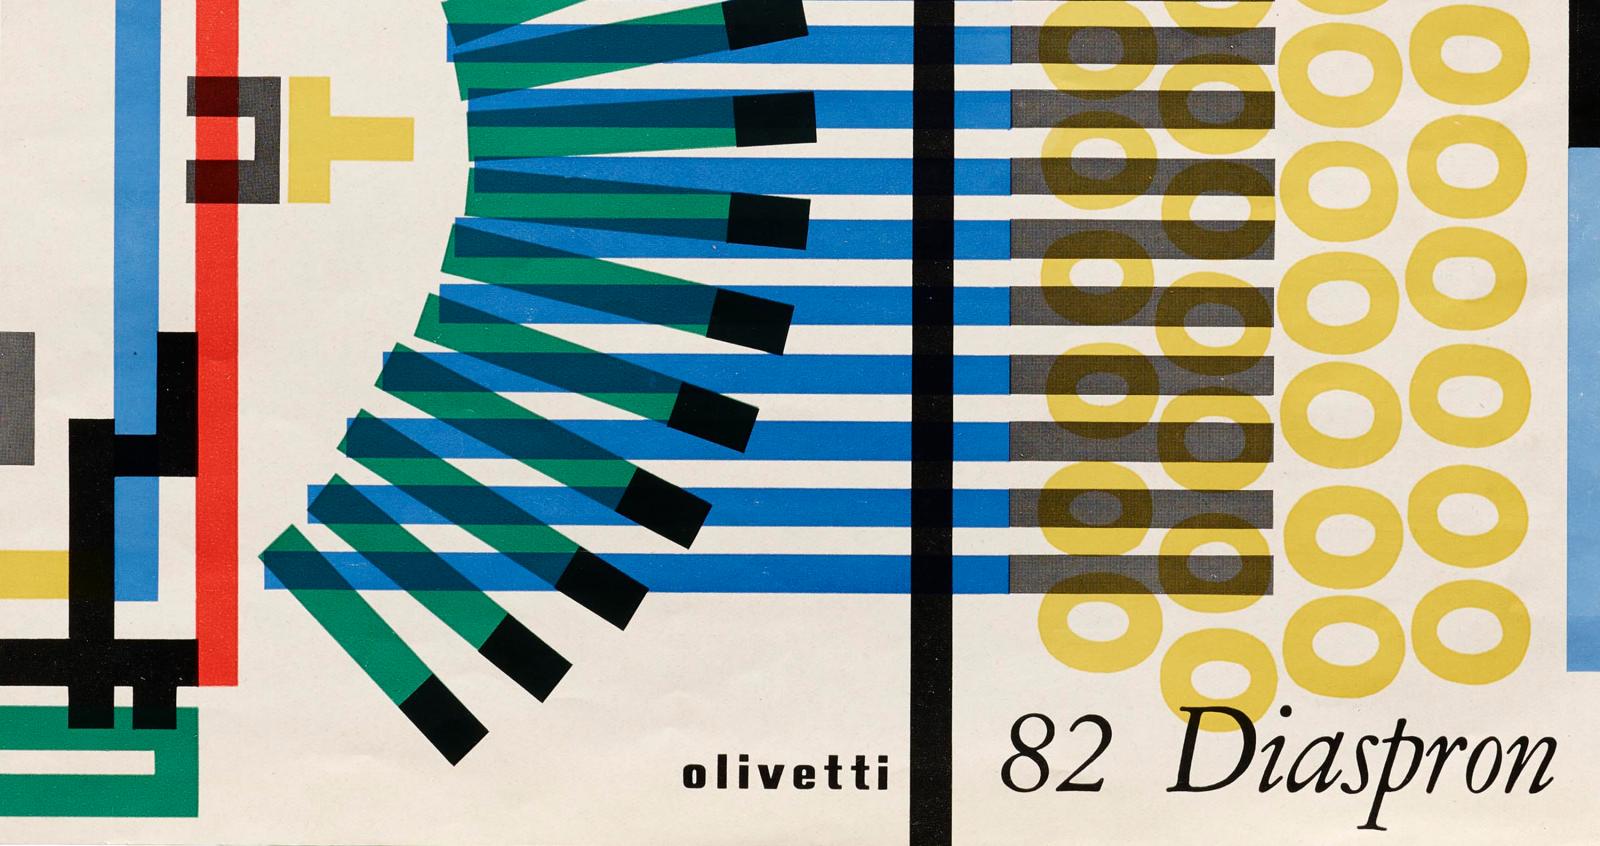 More information about "Giovanni Pintori for Olivetti"